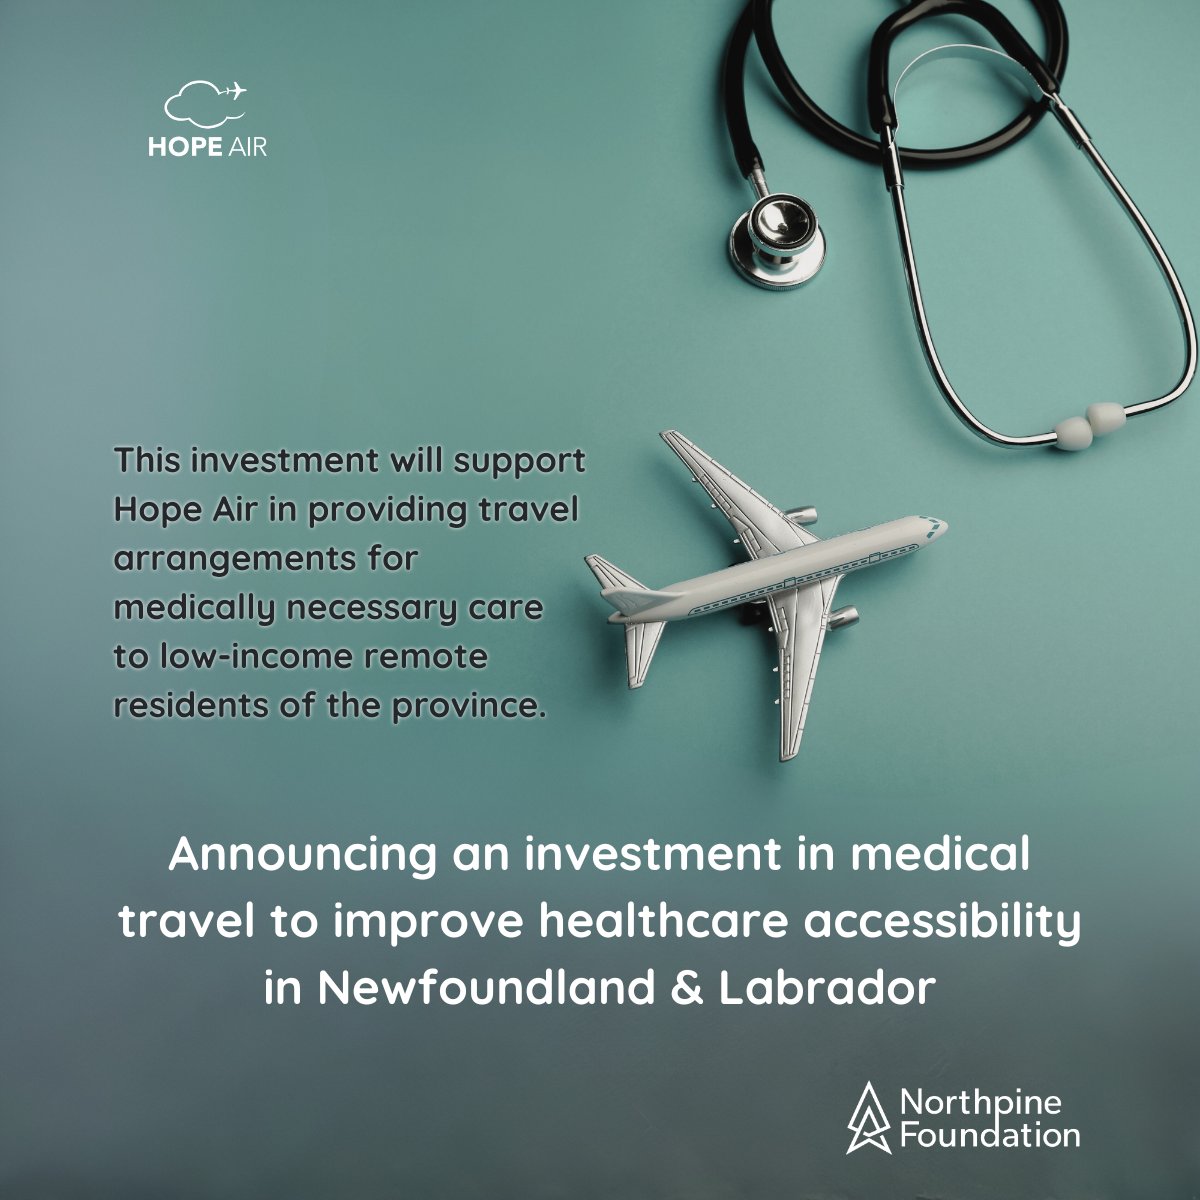 We are proud to announce an investment in @HopeAir  to enhance healthcare access in rural Newfoundland and Labrador supporting medically necessary travel arrangements for residents in need. northpinefoundation.ca/blog/northpine…

#NorthpineFoundation #HealthcareAccess #NewfoundlandandLabrador